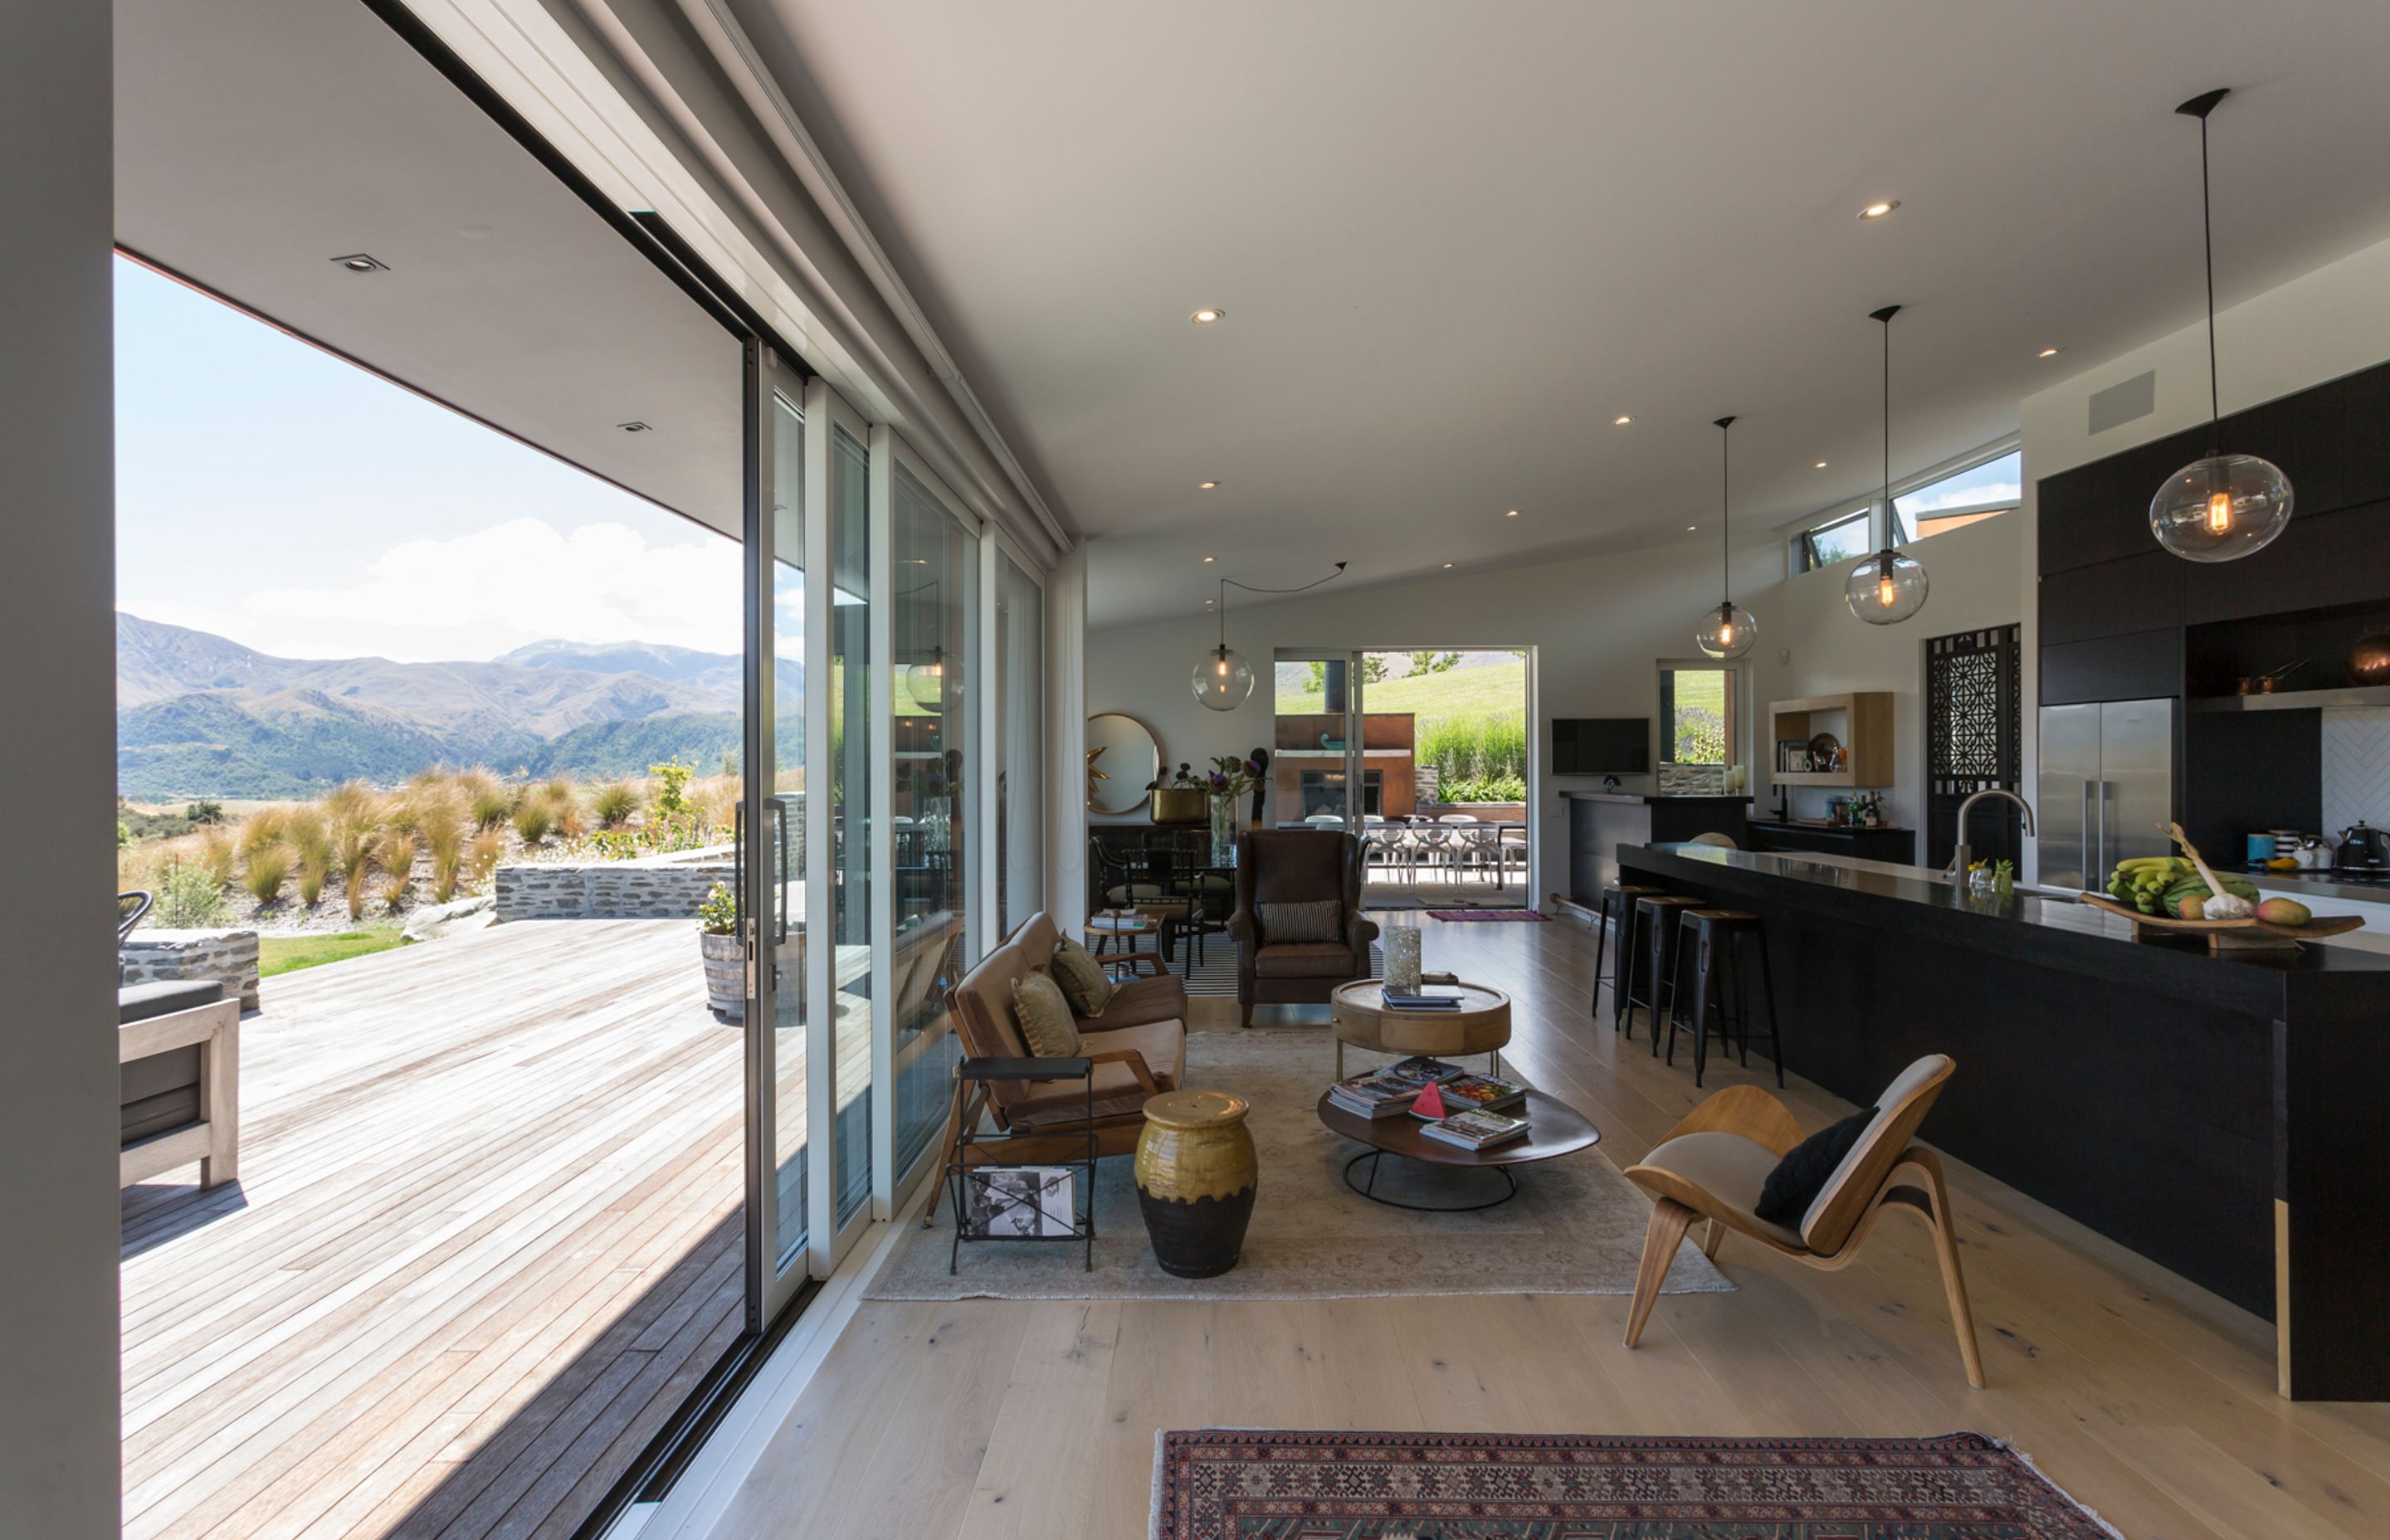 A casual living area leads onto a large deck, which is accessed via full-width stacking sliders.